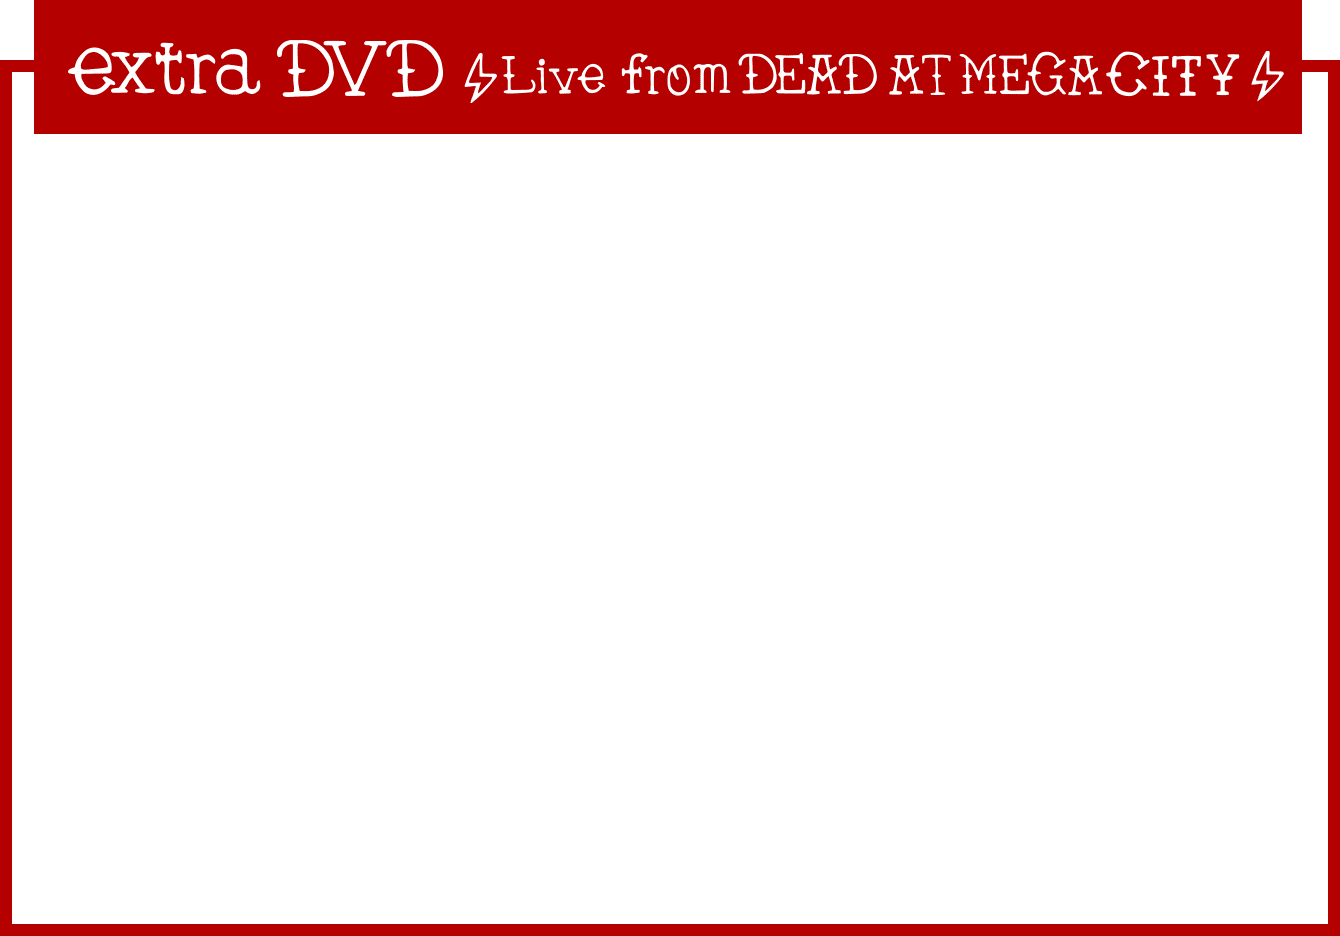 DVD「Live from DEAD AT MEGA CITY」(初回盤のみ付属): 1. Let The Beat Carry On / 2. Better Left Unsaid / 3. I Won’t Turn Off My Radio/ 4. Still I Got To Fight / 5. Ricky Punks Ⅲ